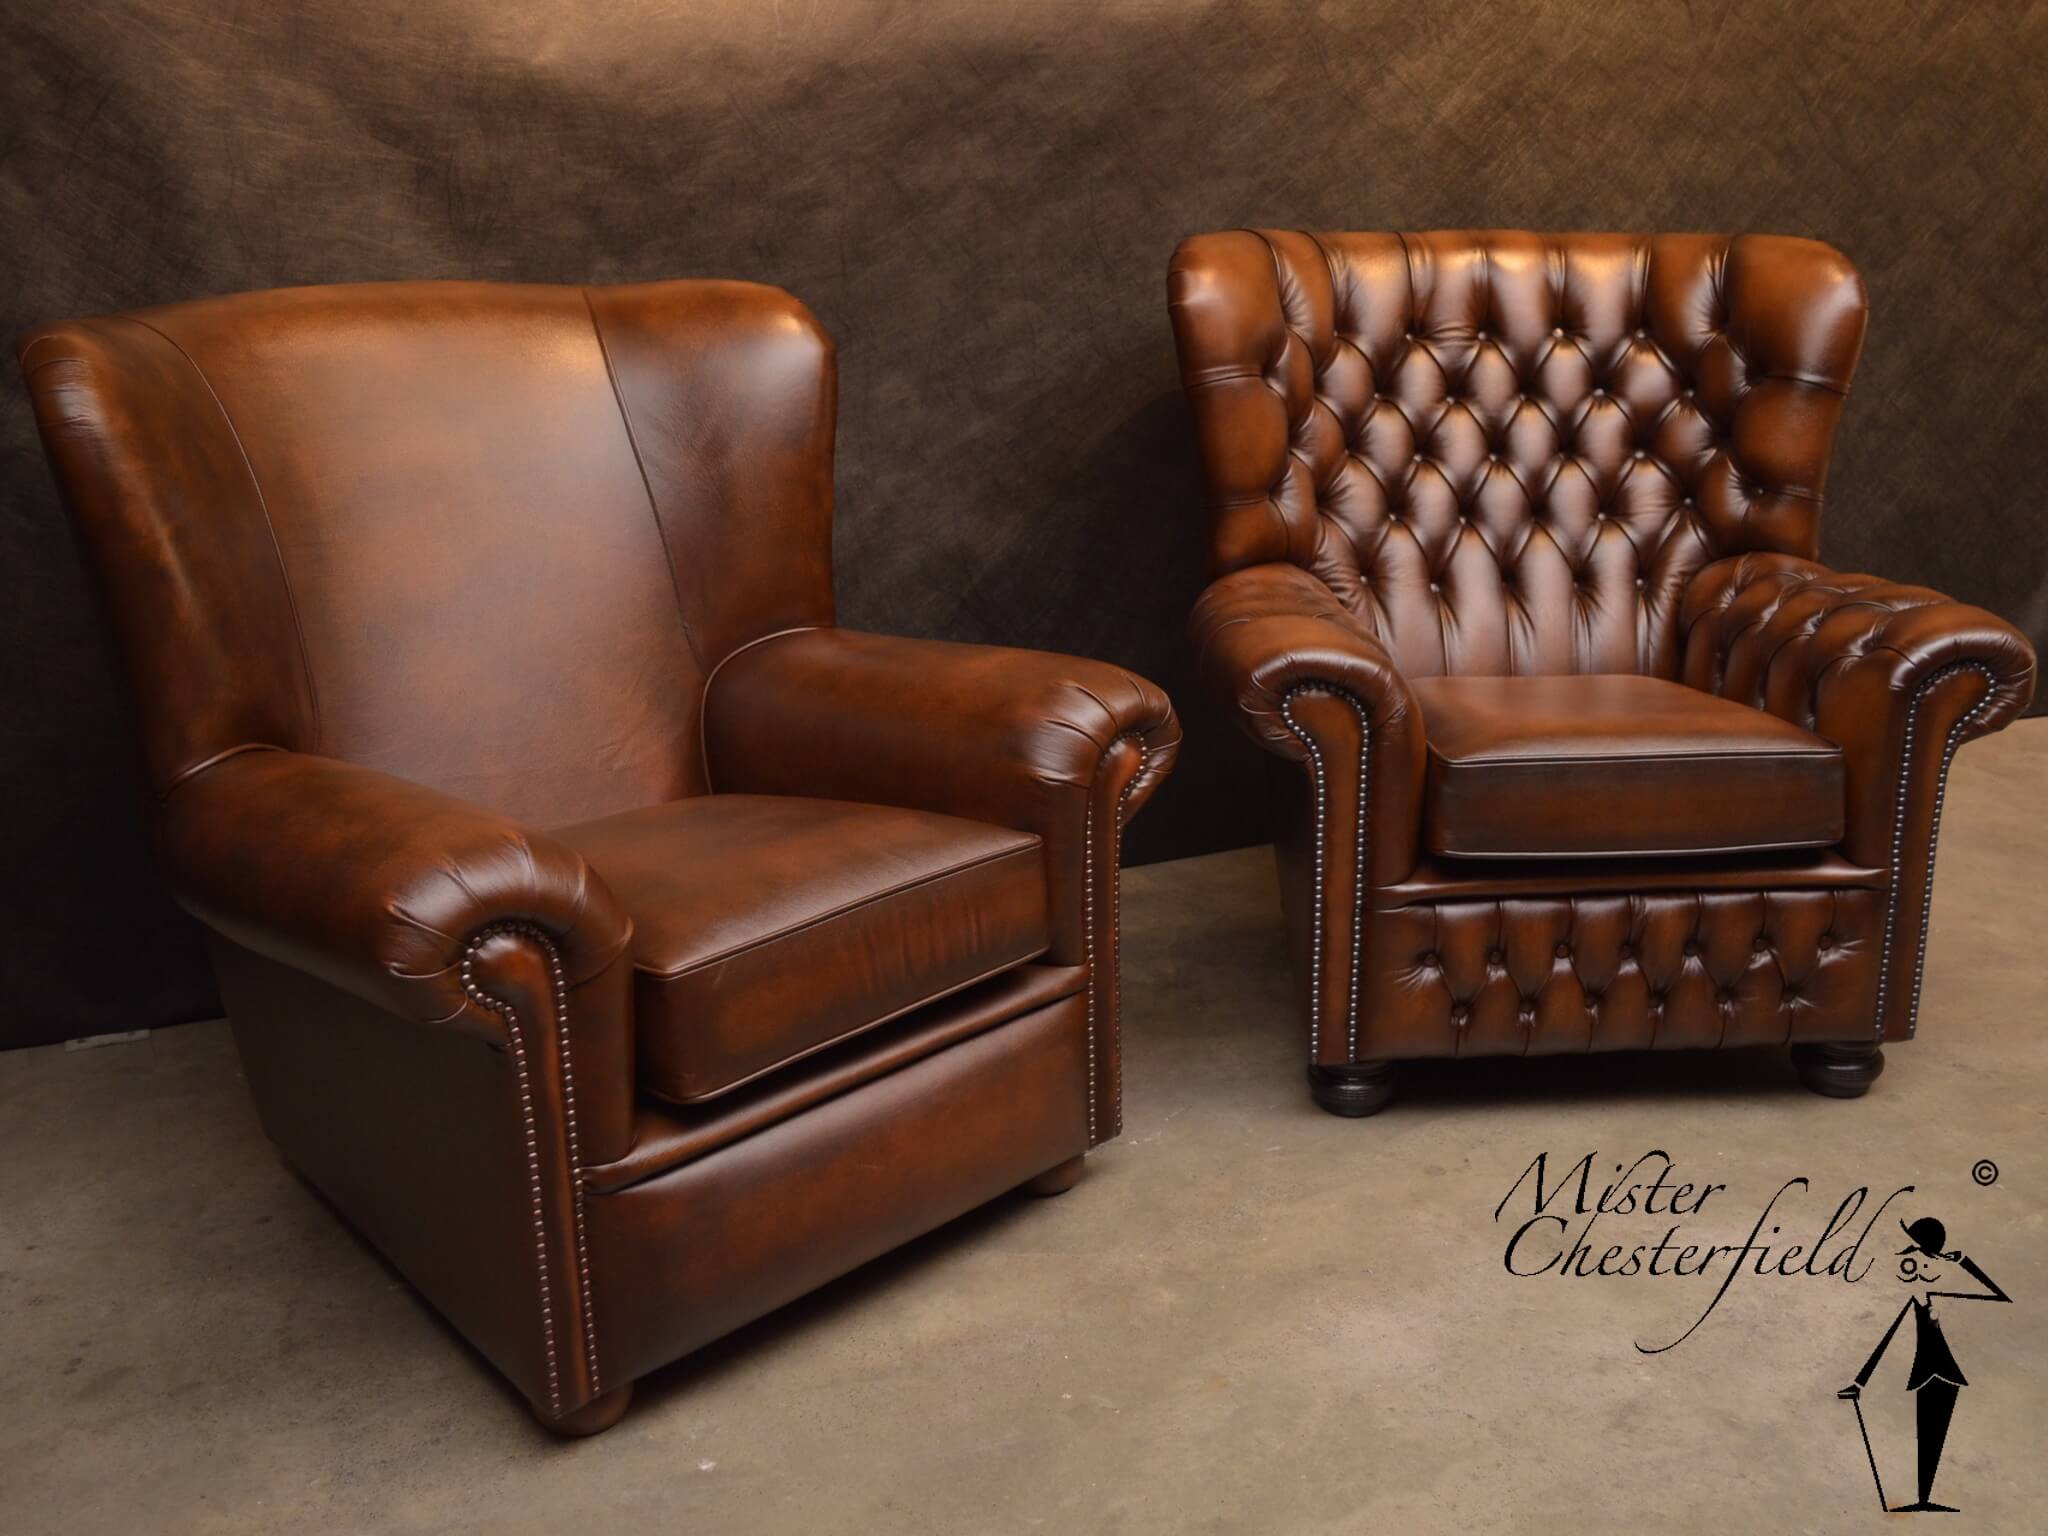 Chesterfield Showroom - Chesterfield